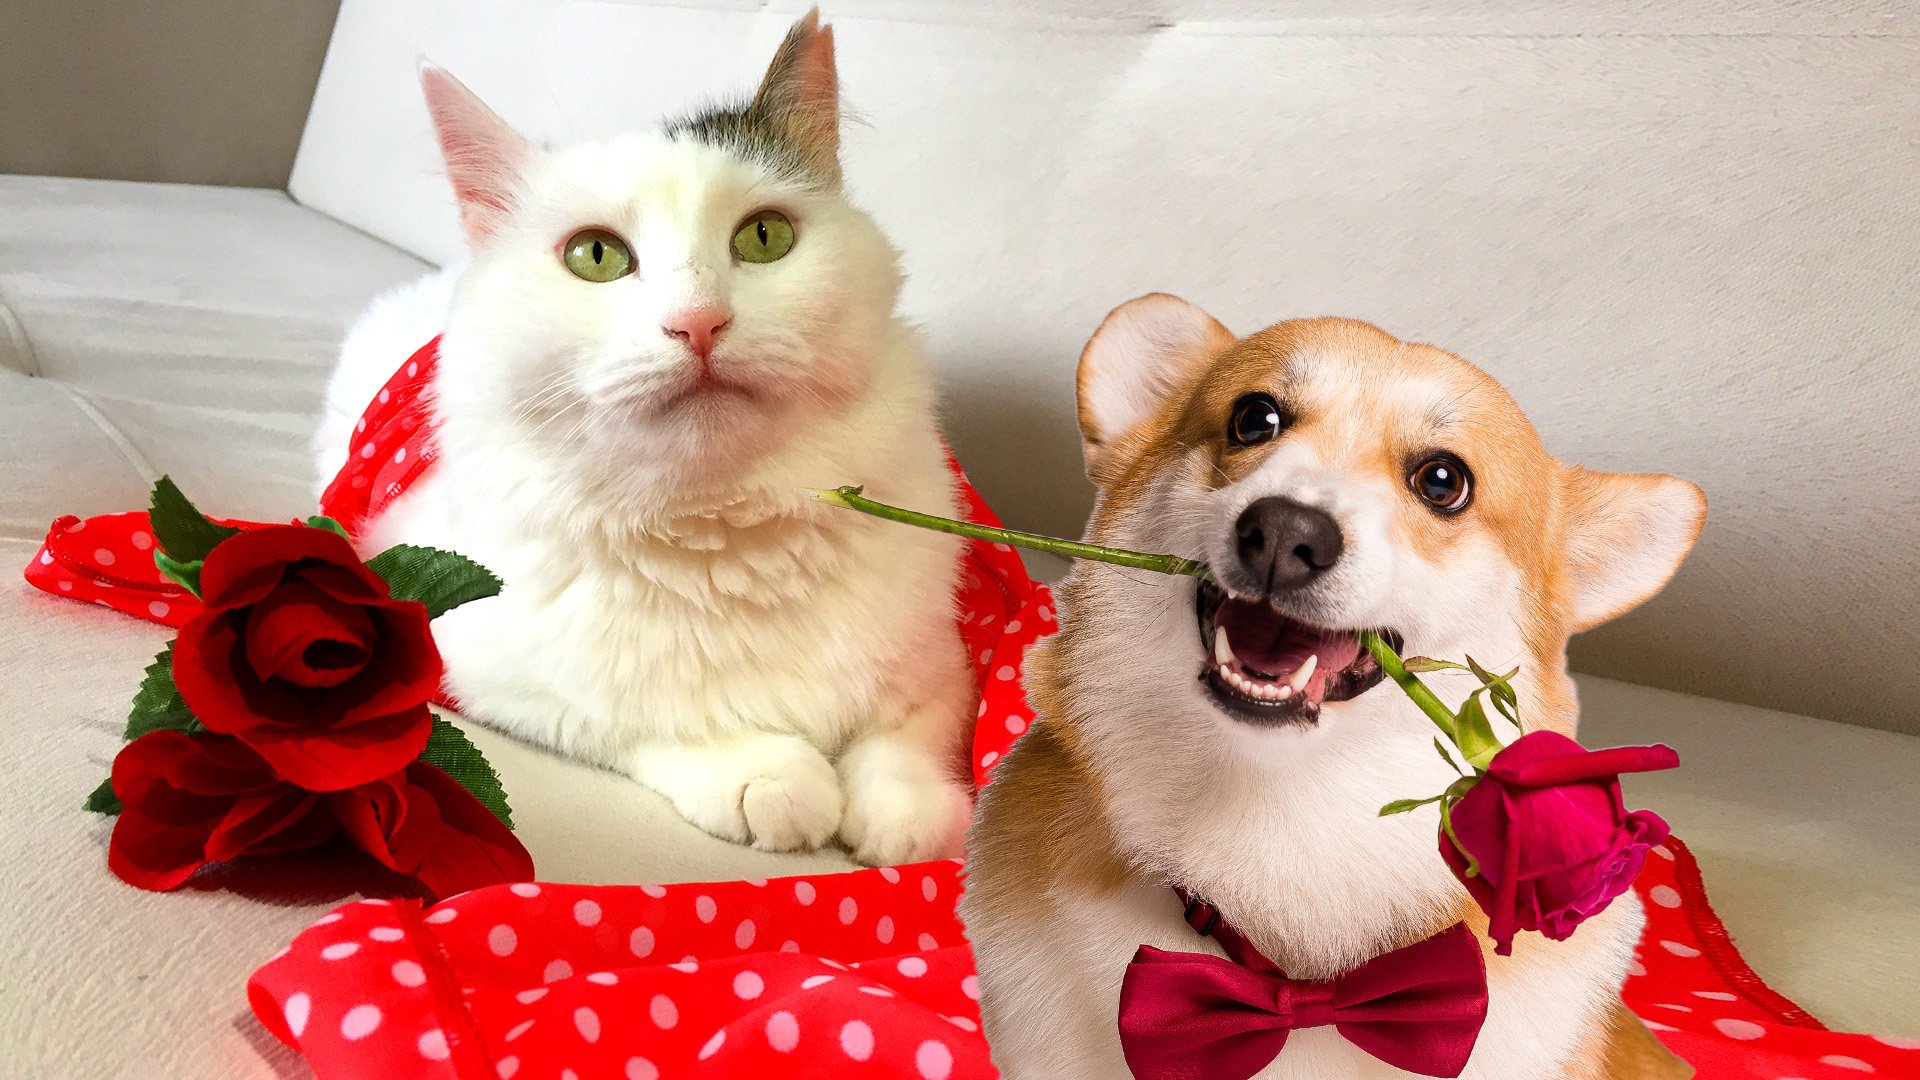 Young adults in China are staging online matchmaking events for their pets in a bid to relieve the stresses and strains of modern life. Photo: SCMP composite/Shutterstock